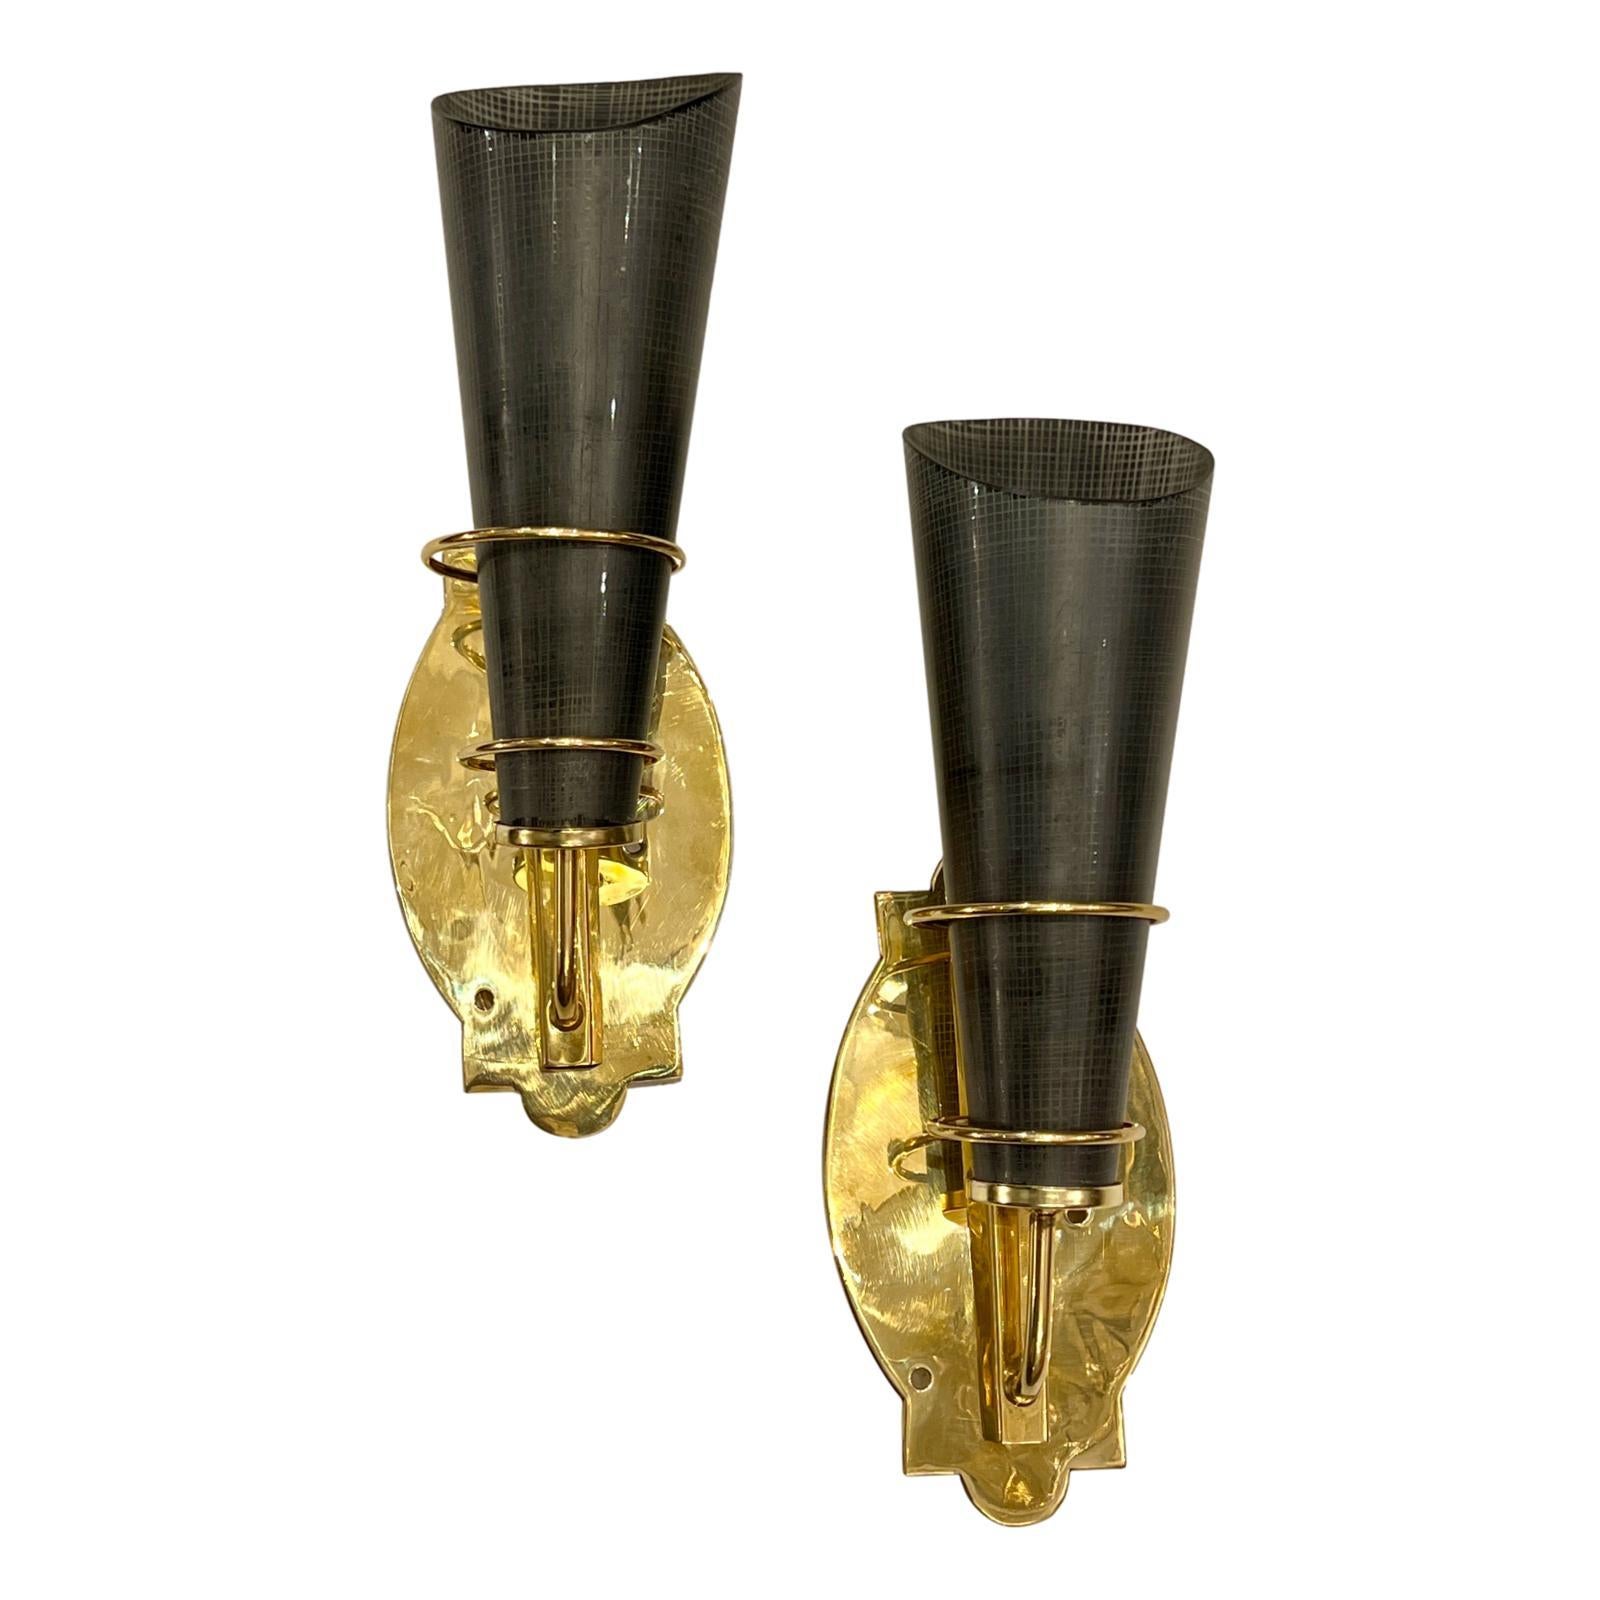 Pair of Italian circa 1950's polished bronze sconces with molded glass shades.

Measurements:
Height: 14